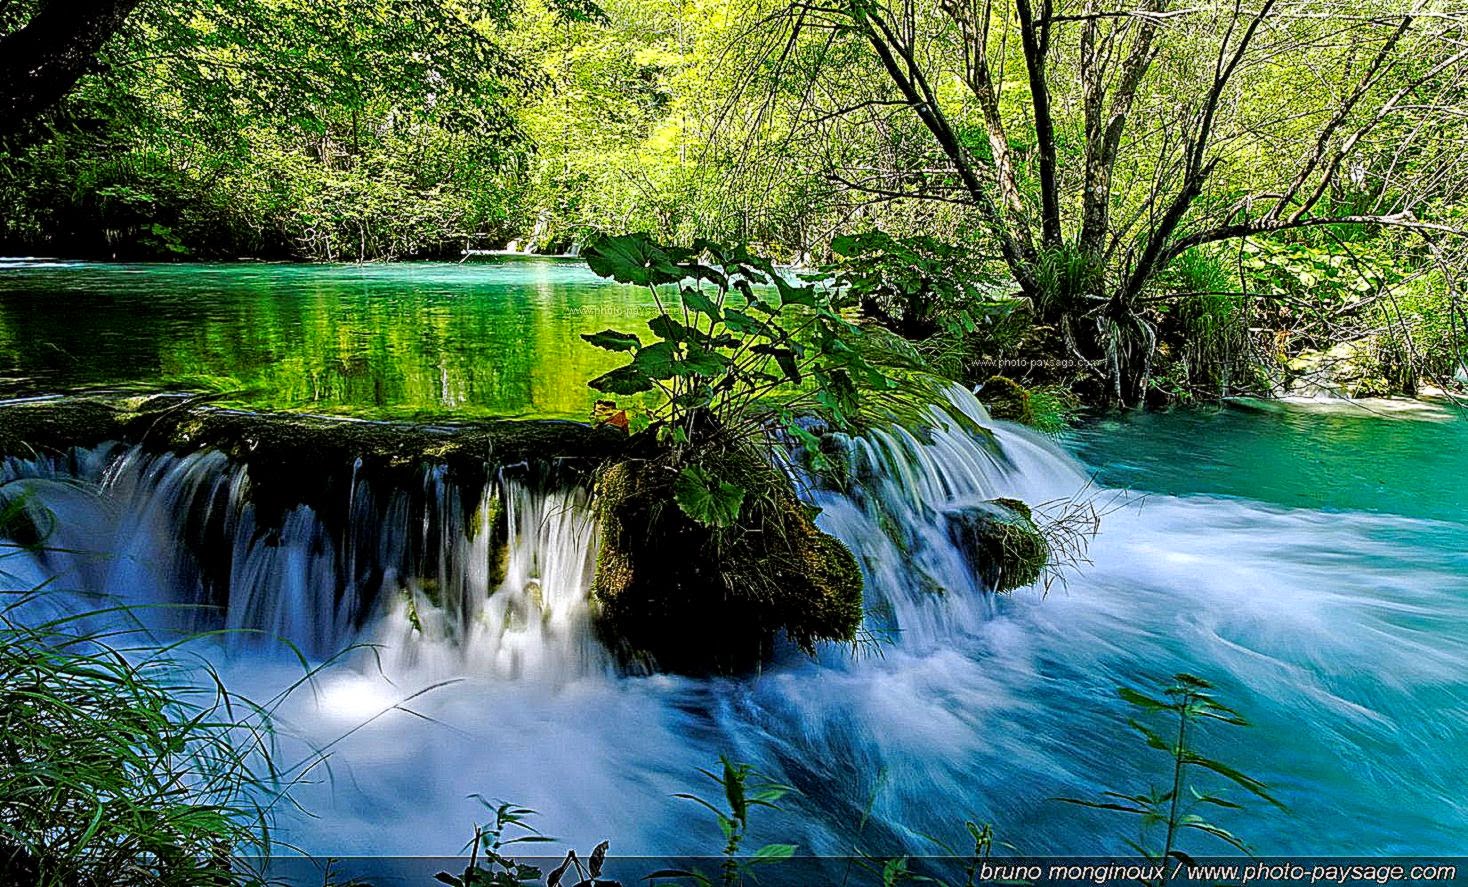 Most Beautiful Nature Pictures River And Waterfalls - Waterfall - HD Wallpaper 